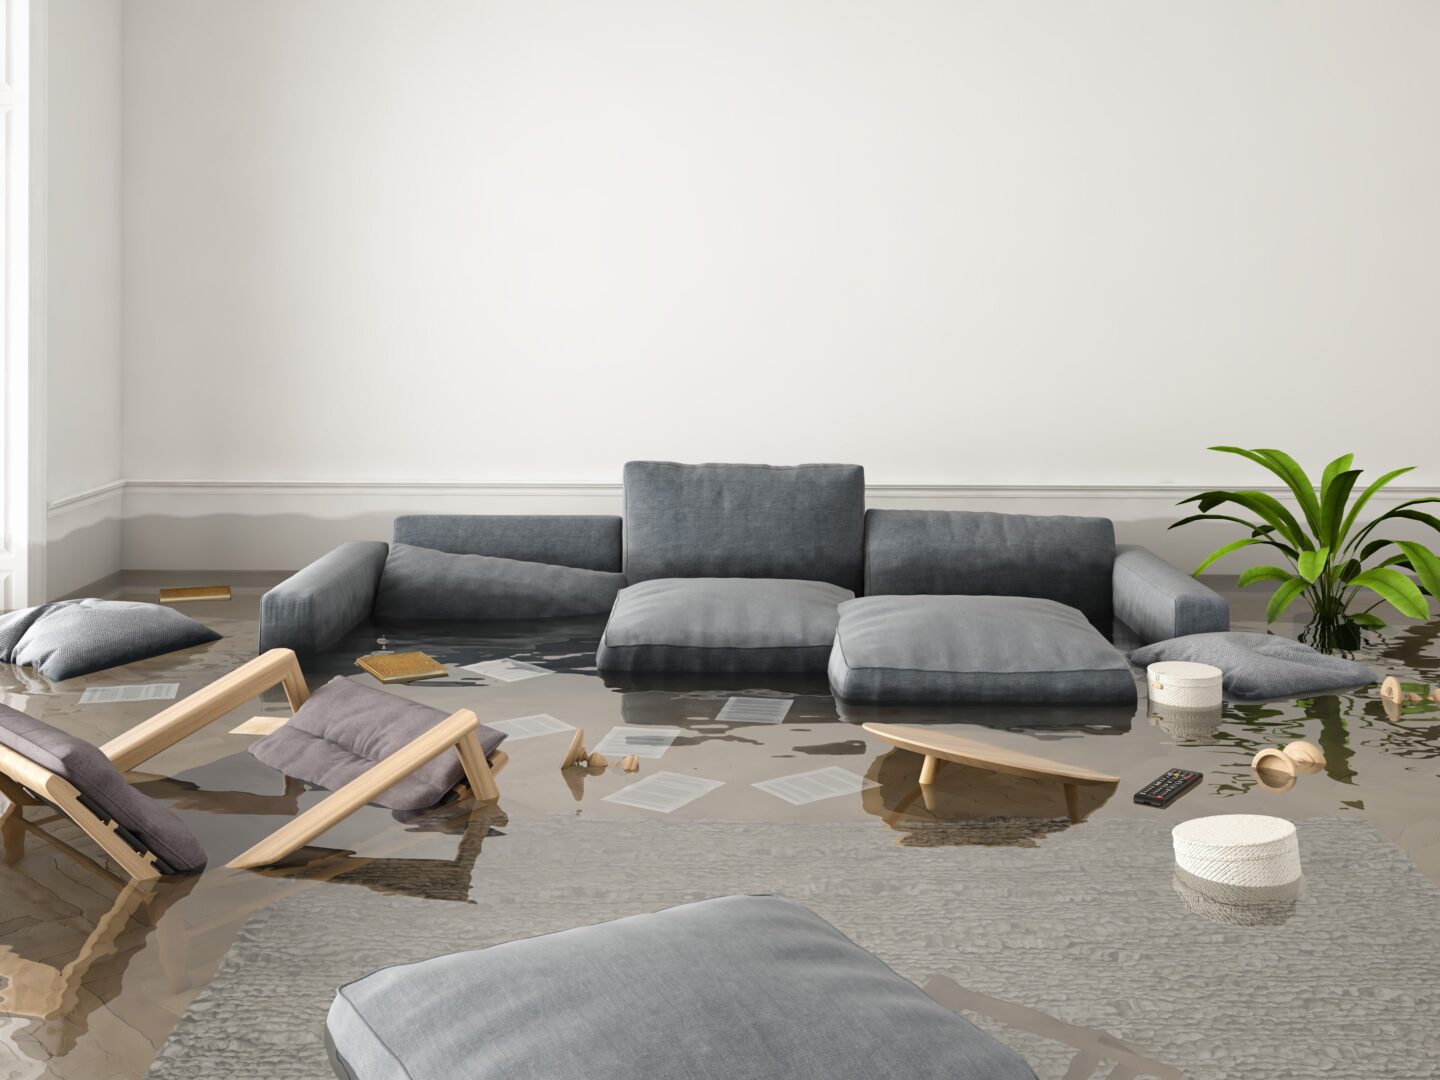 A living room flooded with water and debris.